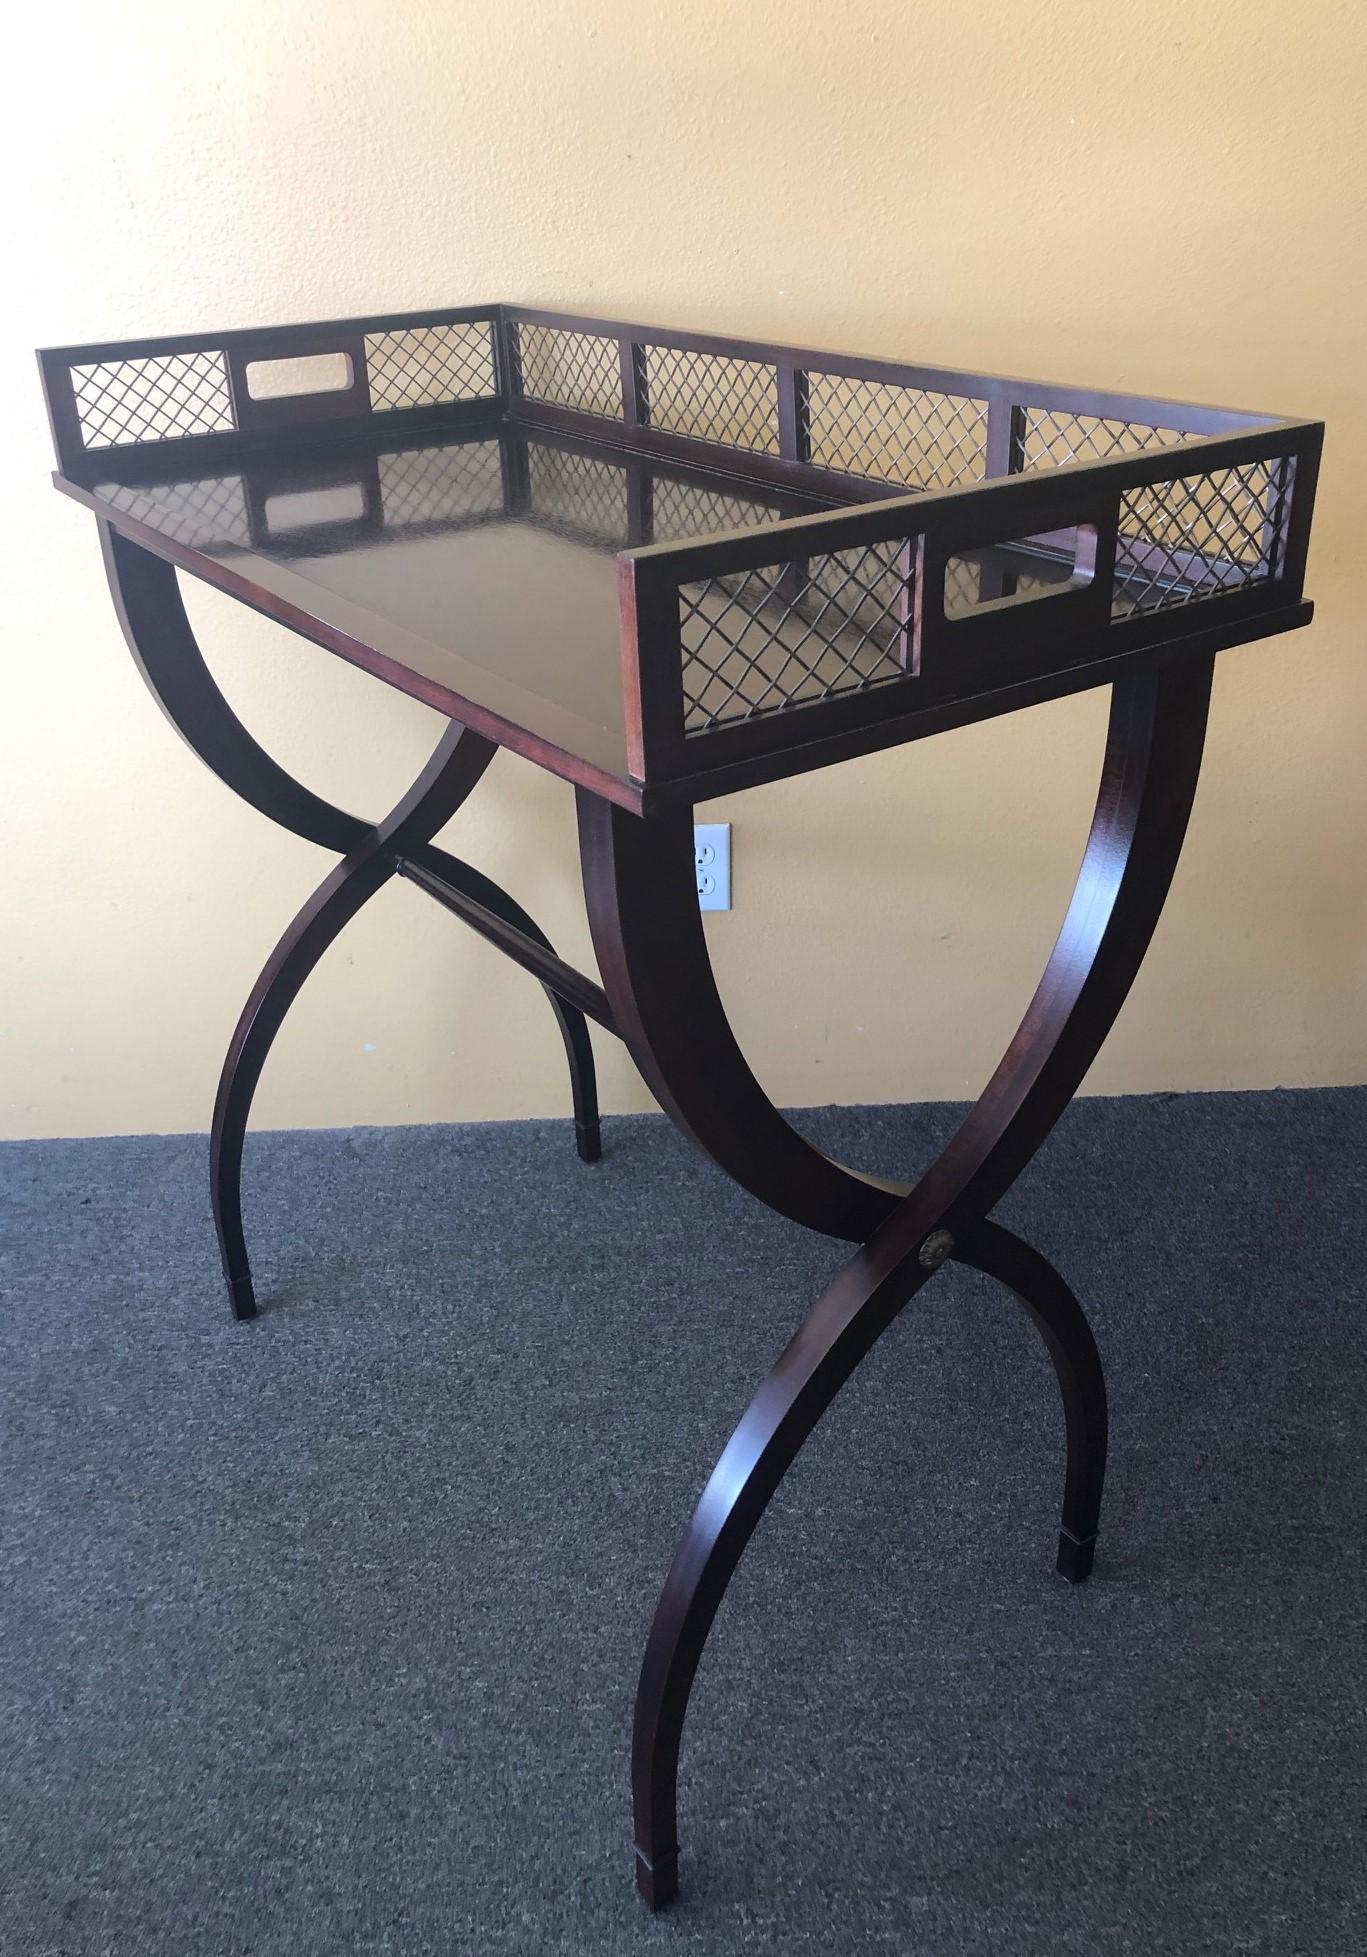 American Mirrored Drinks / Cocktail Tray Table by Barbara Barry for Baker